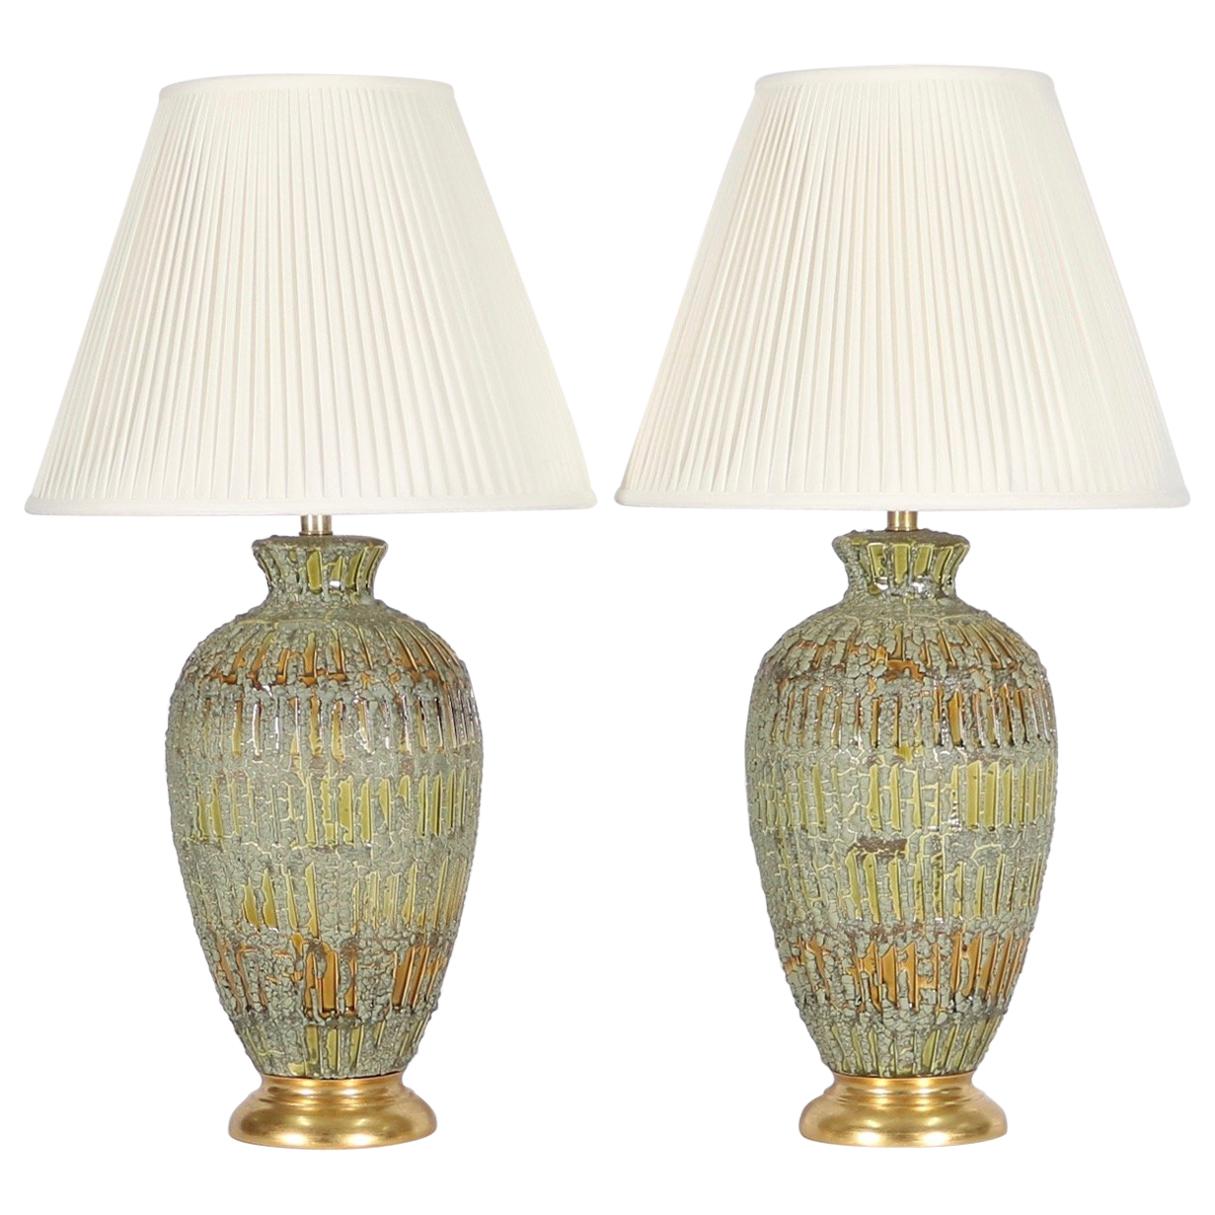 Italian Hollywood Regency Lamps Lava Glazed in Green and Gold Tones